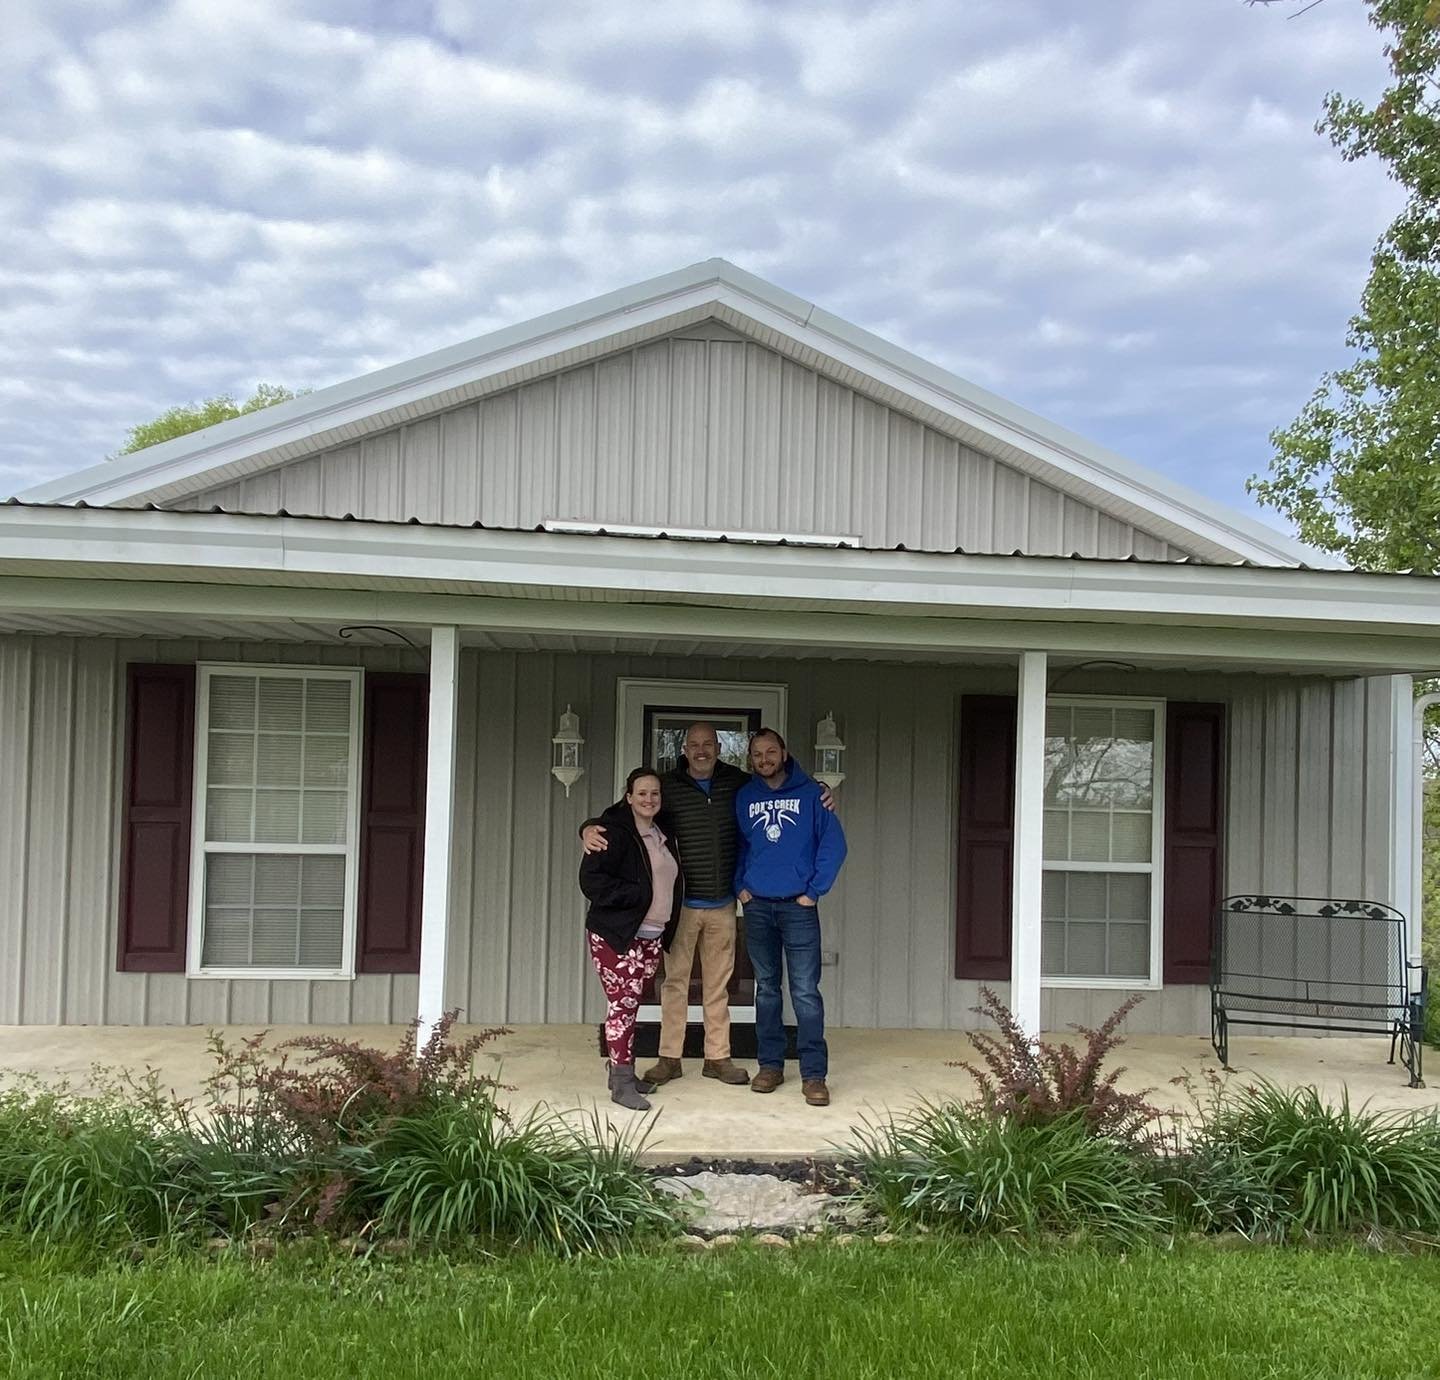 🎉Let&rsquo;s ALL say a BIG Congratulations 🎉
To our wonderful repeat clients, Cody &amp; Jessica on the purchase of of their great new Cox&rsquo;s Creek home 🏡 

Thank you both for you choosing Area One Realty, once again to assist you with your r